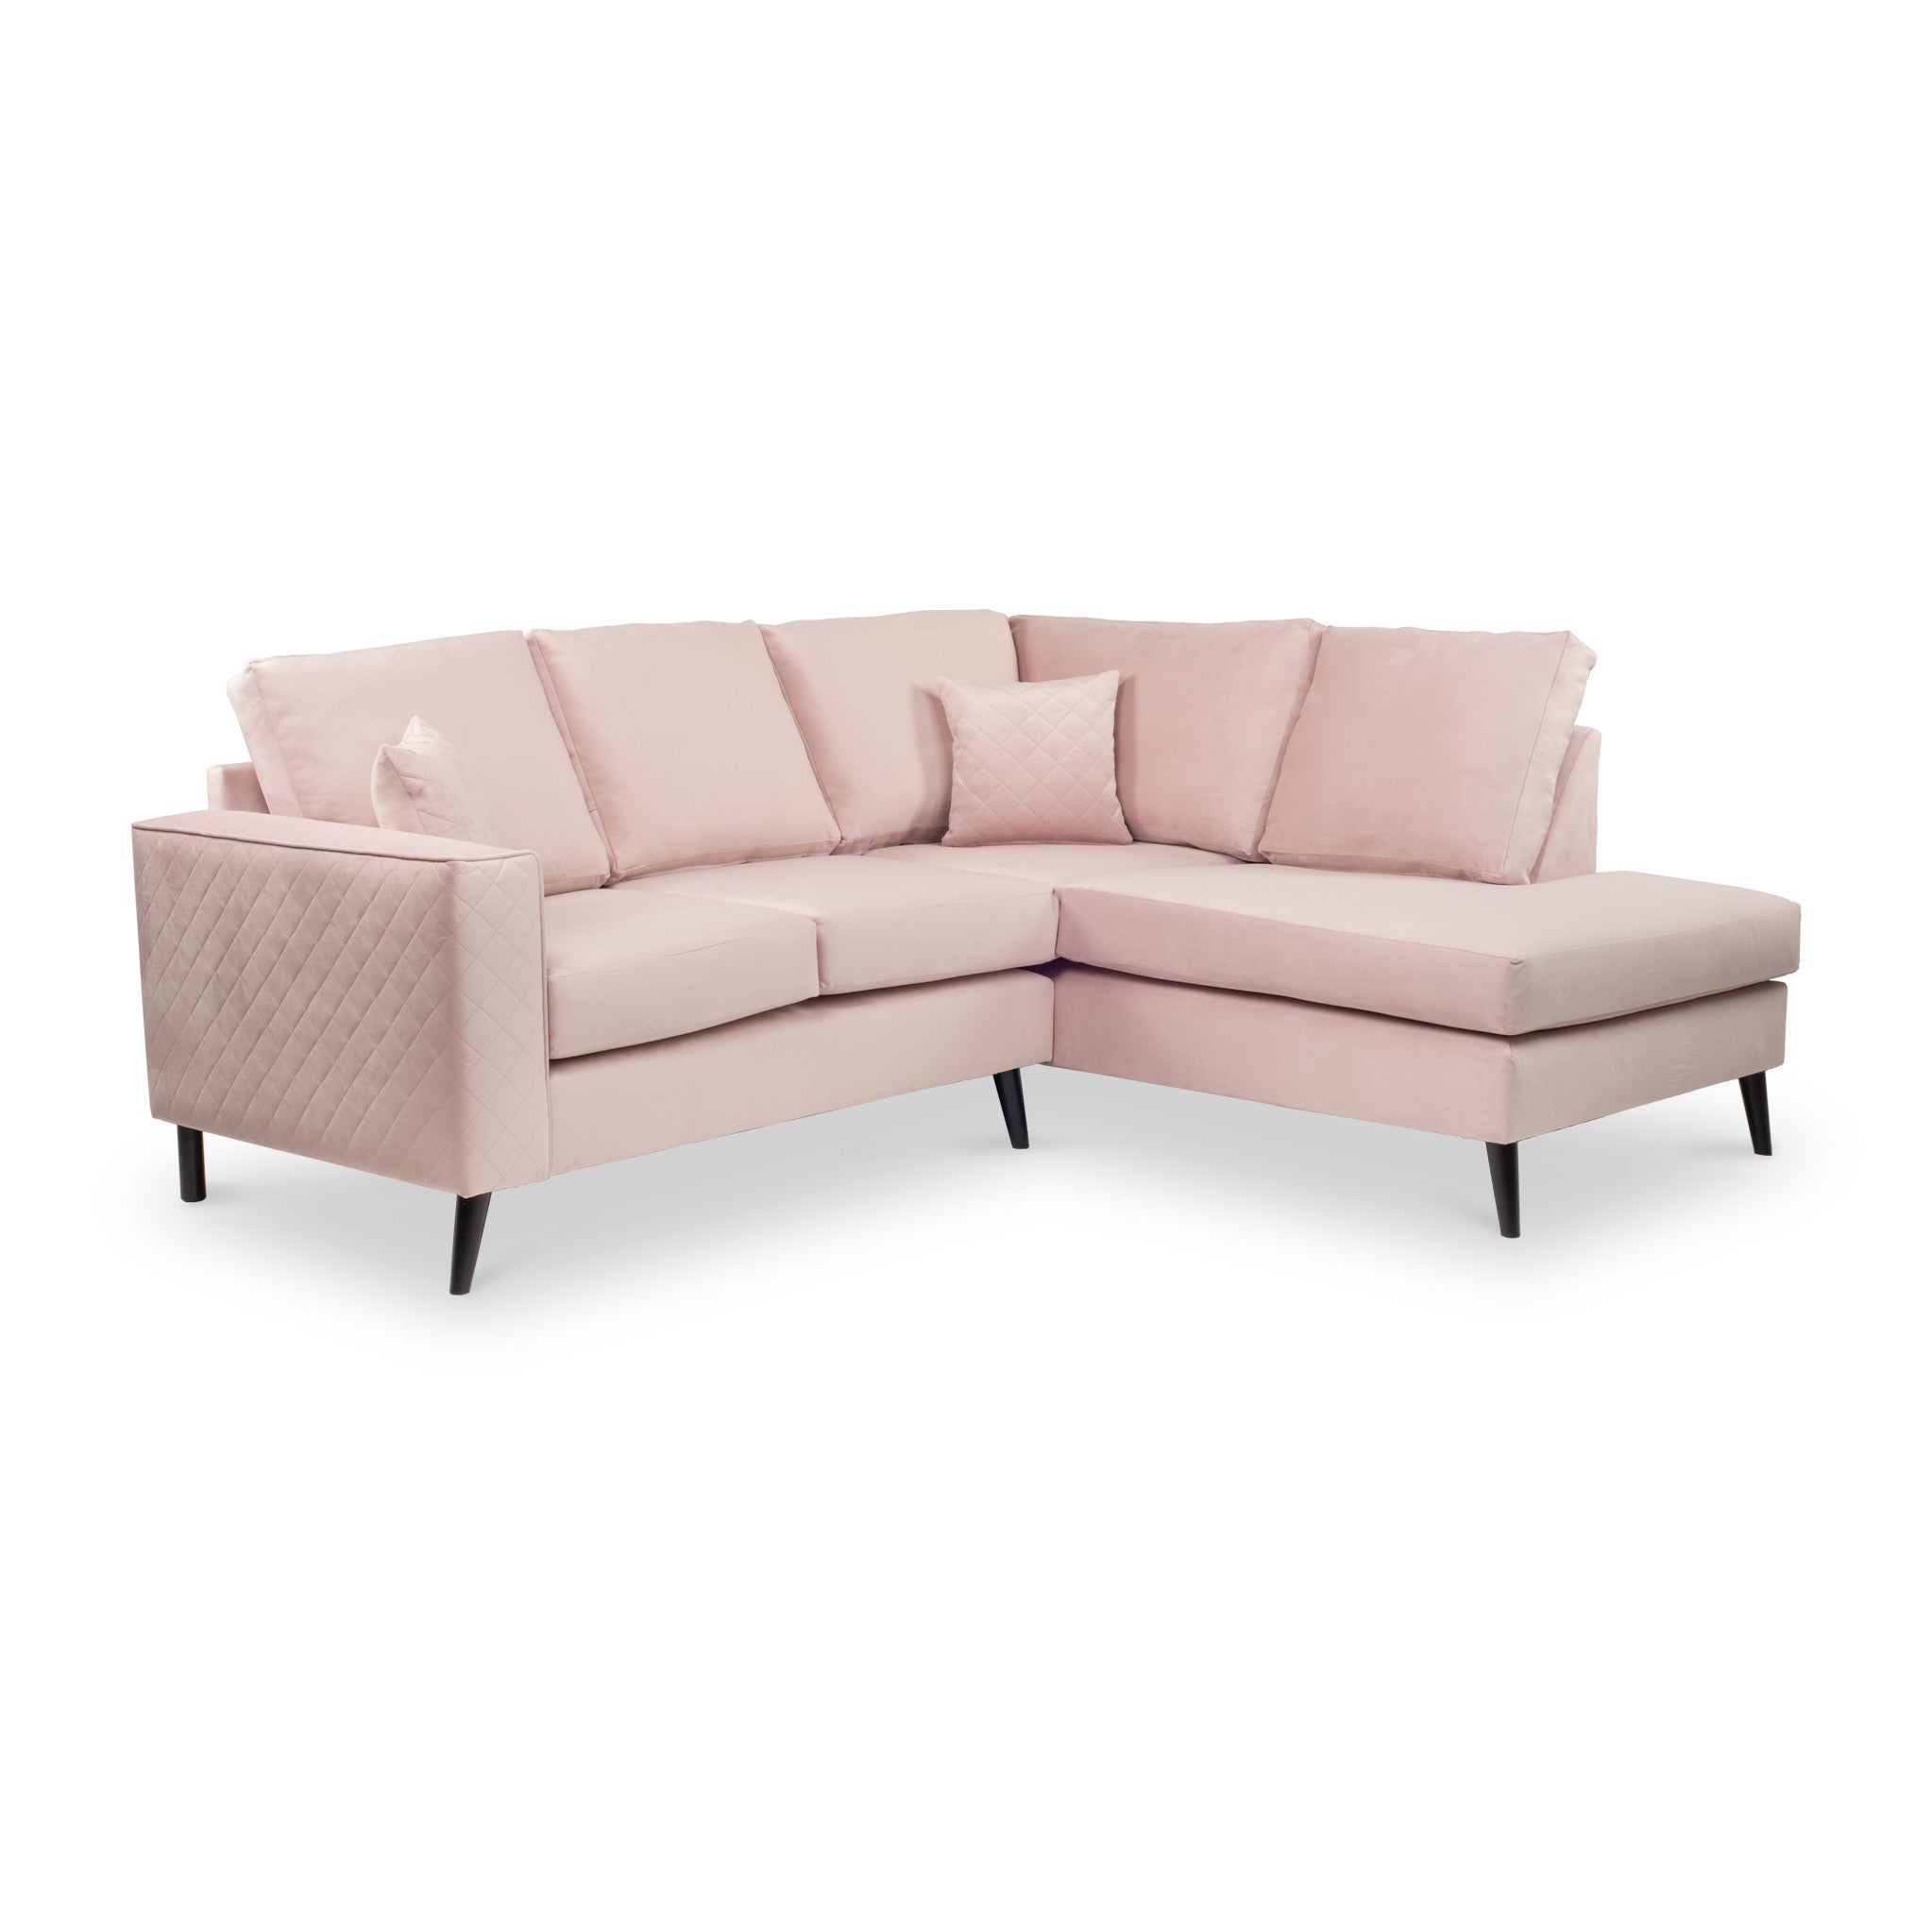 Swift Velvet 3 Seater Chaise Sofa Chic Fabric Couch Roseland